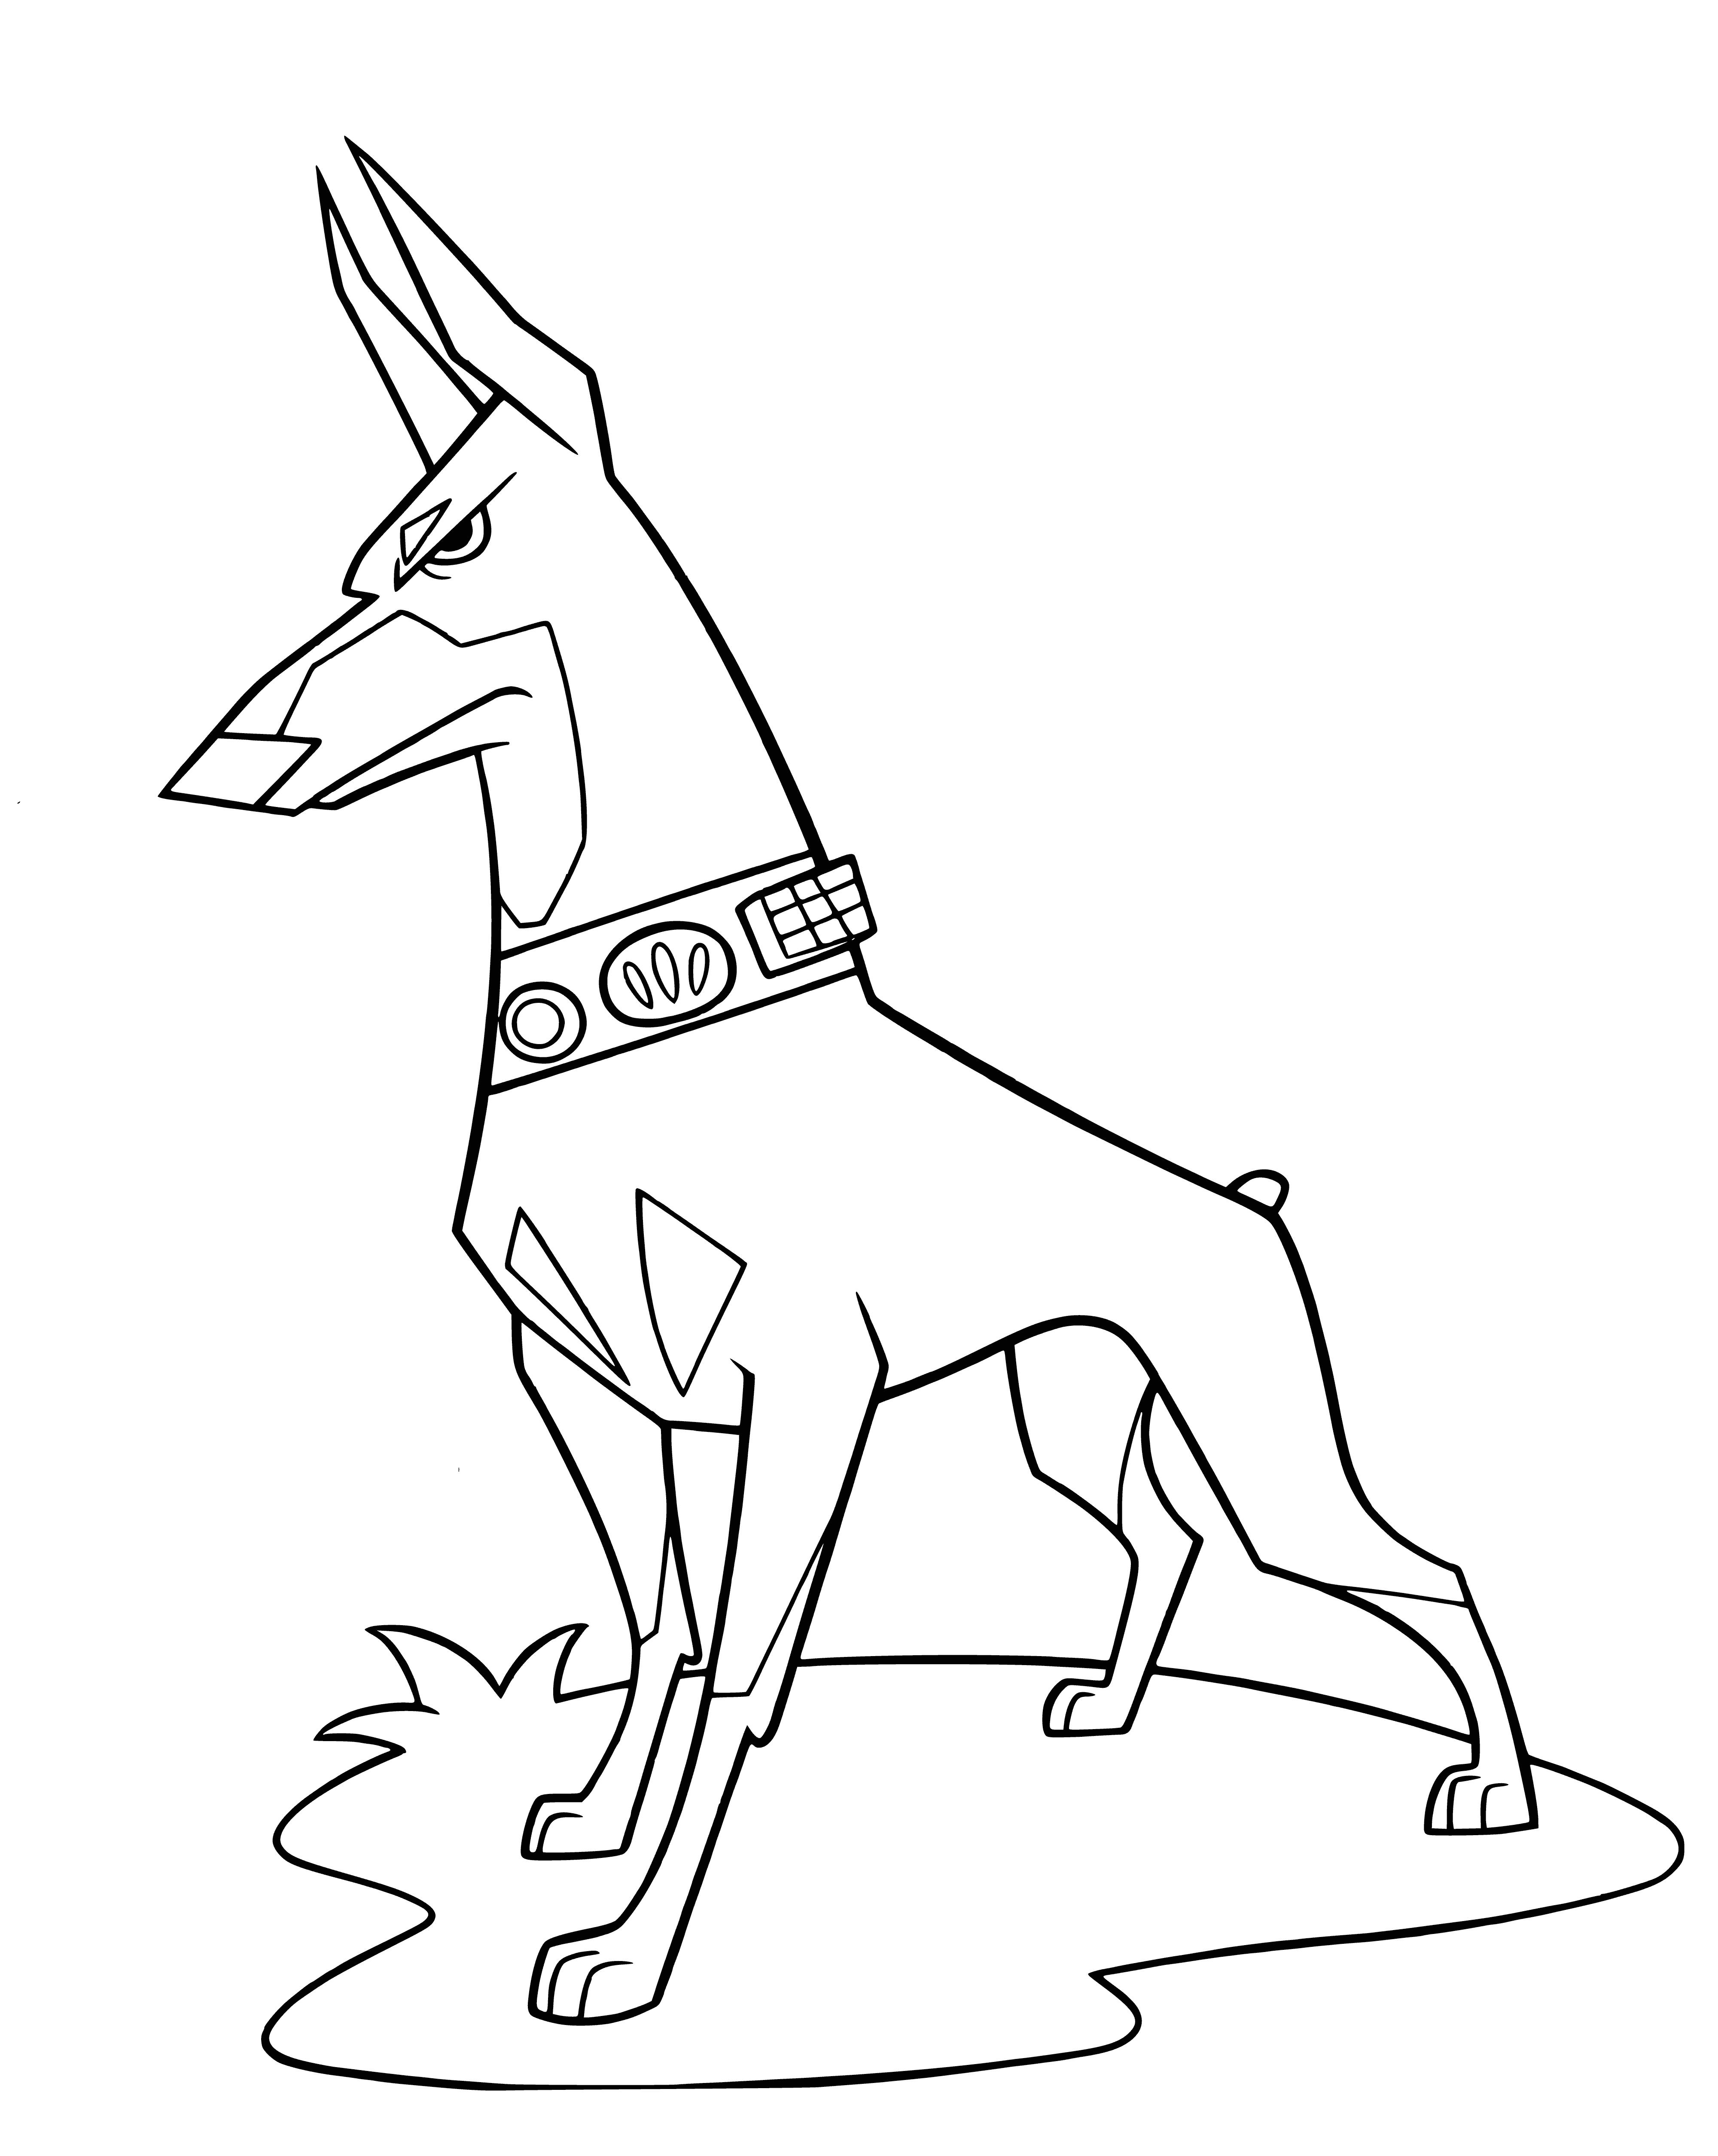 coloring page: Large, brown dog w/ black nose & ears & open, sharp-toothed mouth. Large, brown eyes. Head held high, standing on four legs.